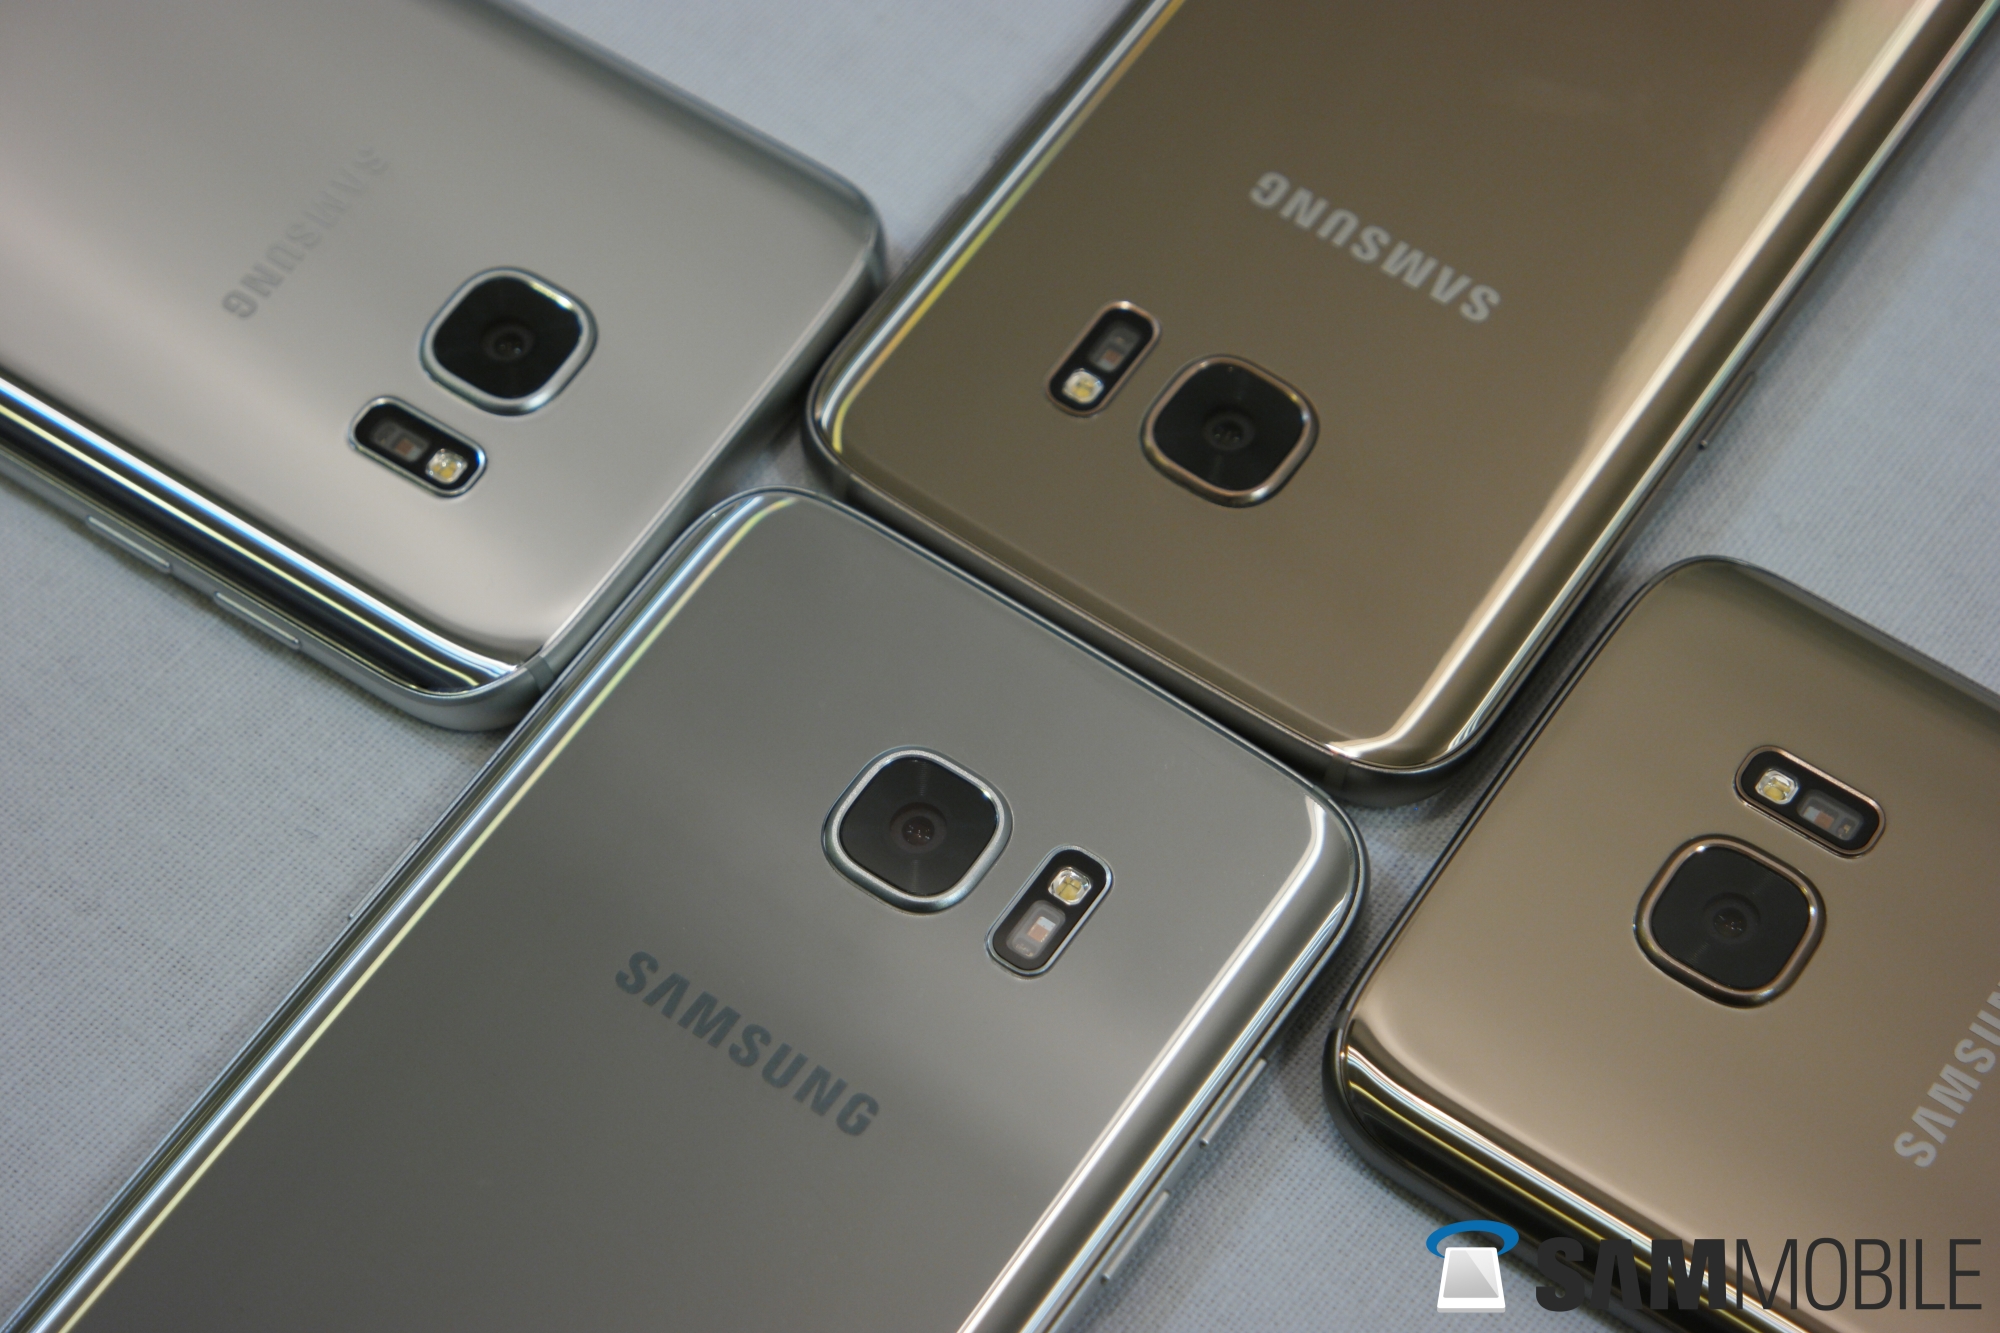 Kwelling Beoordeling Sinis 10 years of Samsung Galaxy S flagships: Looking back at the Galaxy S7! -  SamMobile